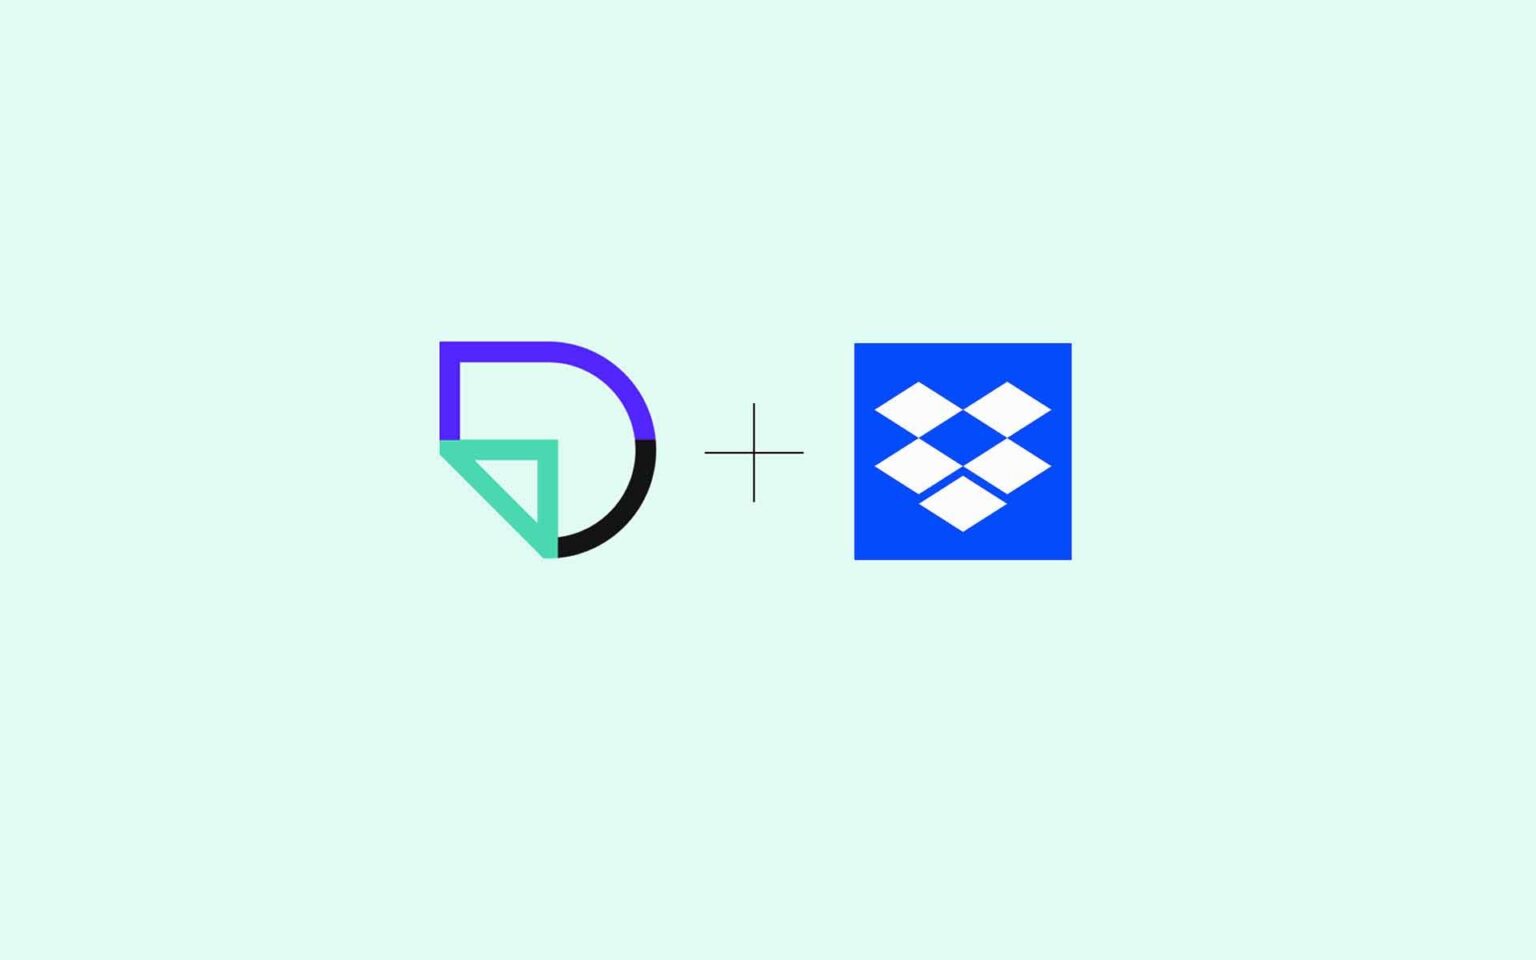 docsend by dropbox